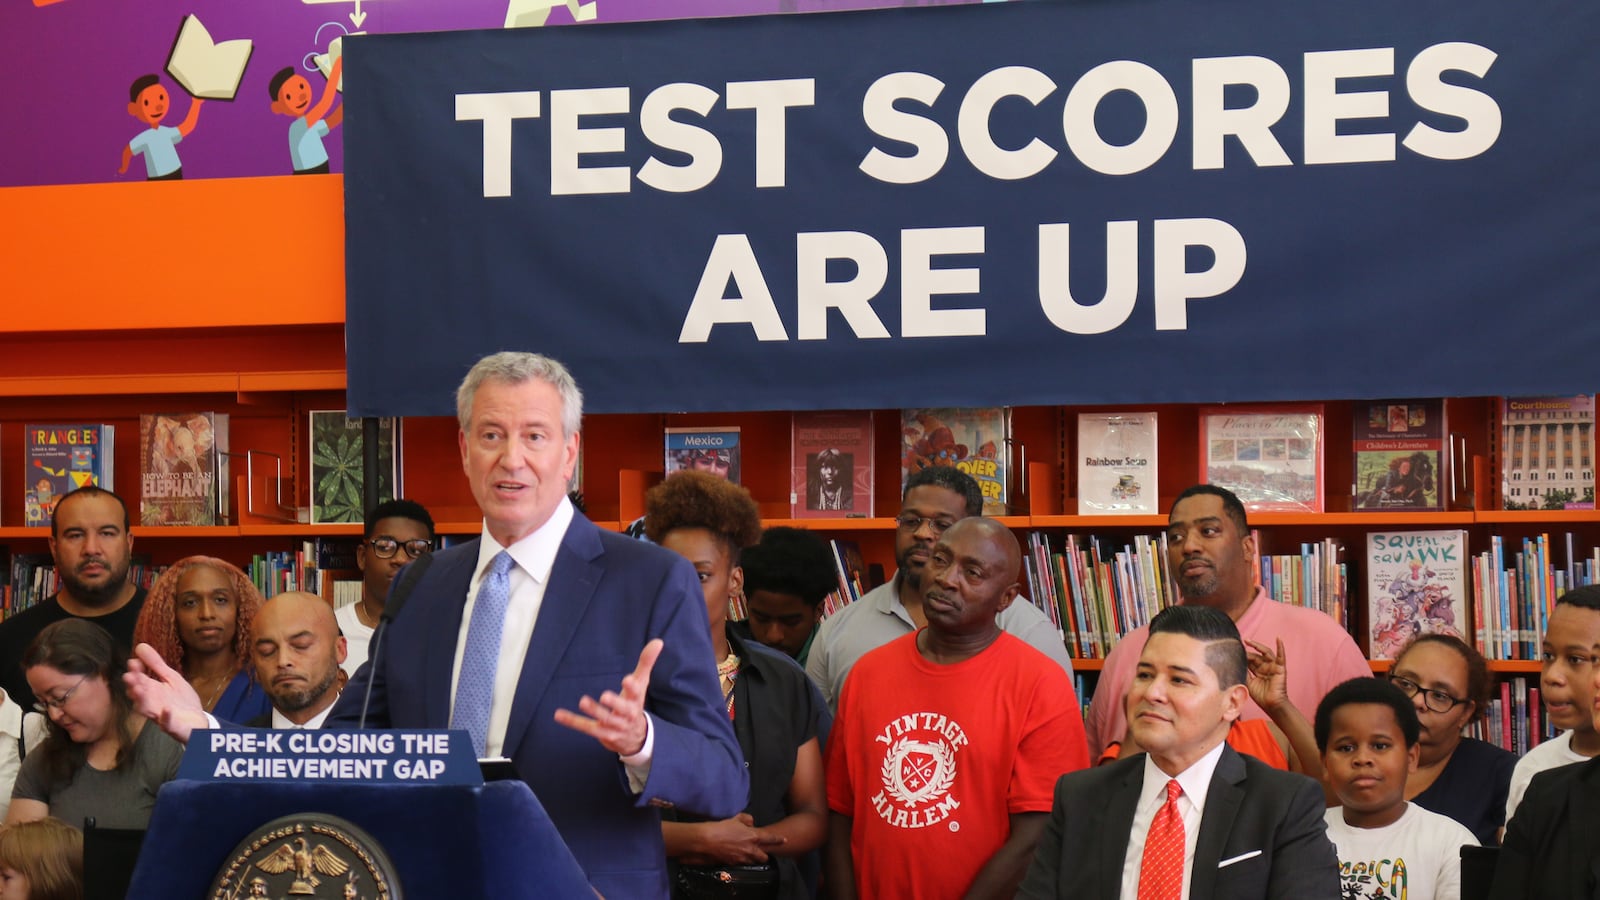 Mayor Bill de Blasio speaks at a press conference about state test scores at P.S. 69 in the Bronx.